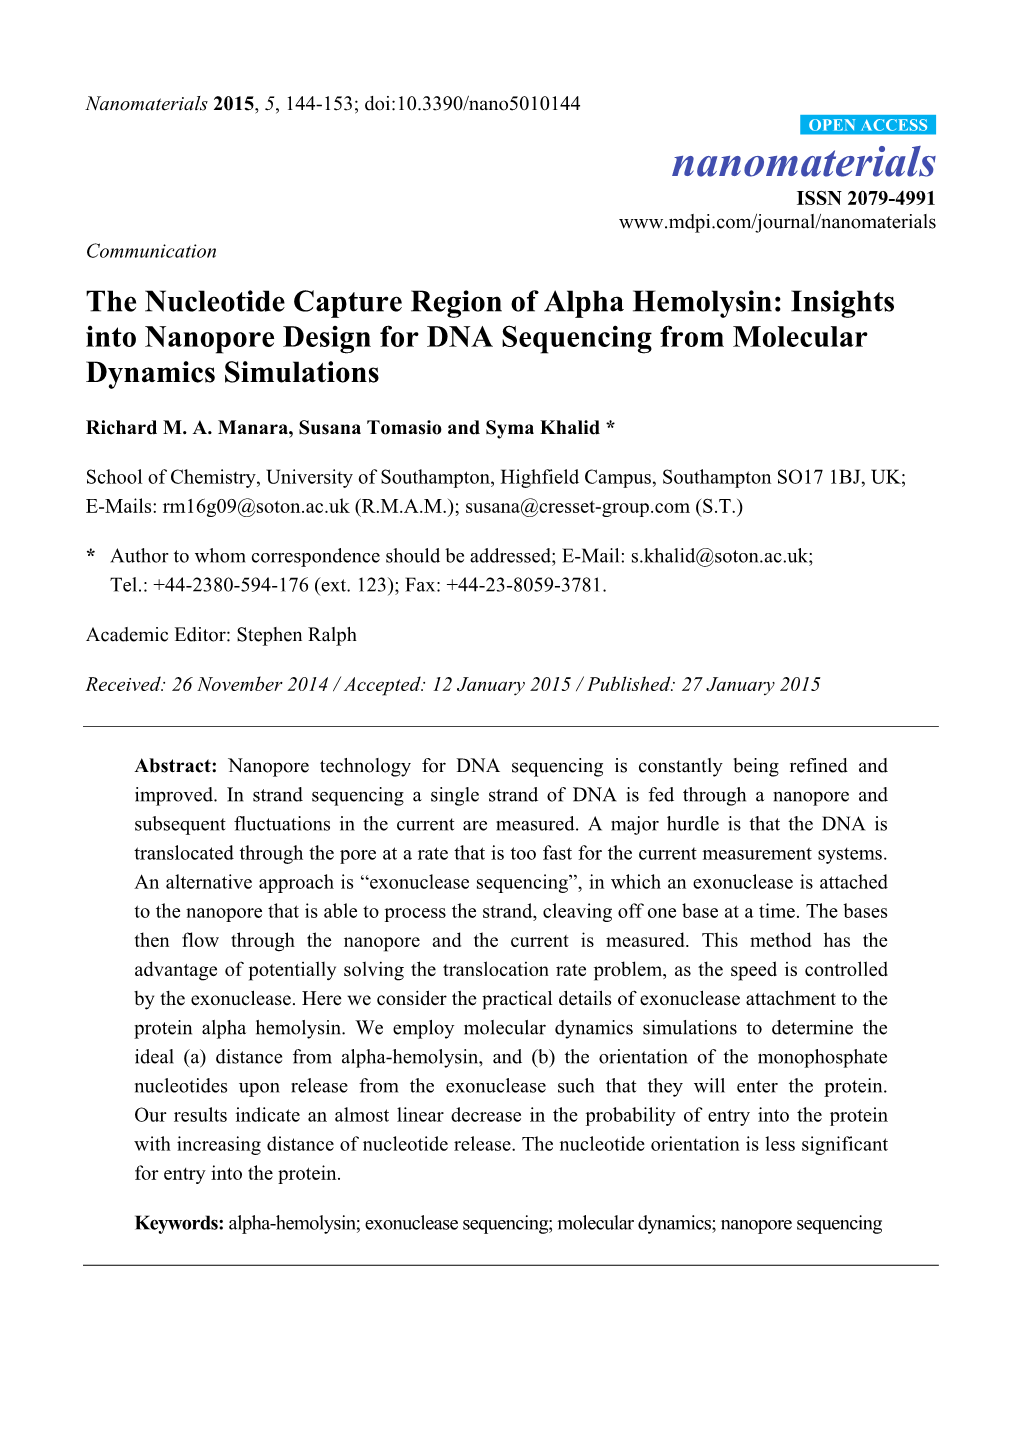 The Nucleotide Capture Region of Alpha Hemolysin: Insights Into Nanopore Design for DNA Sequencing from Molecular Dynamics Simulations